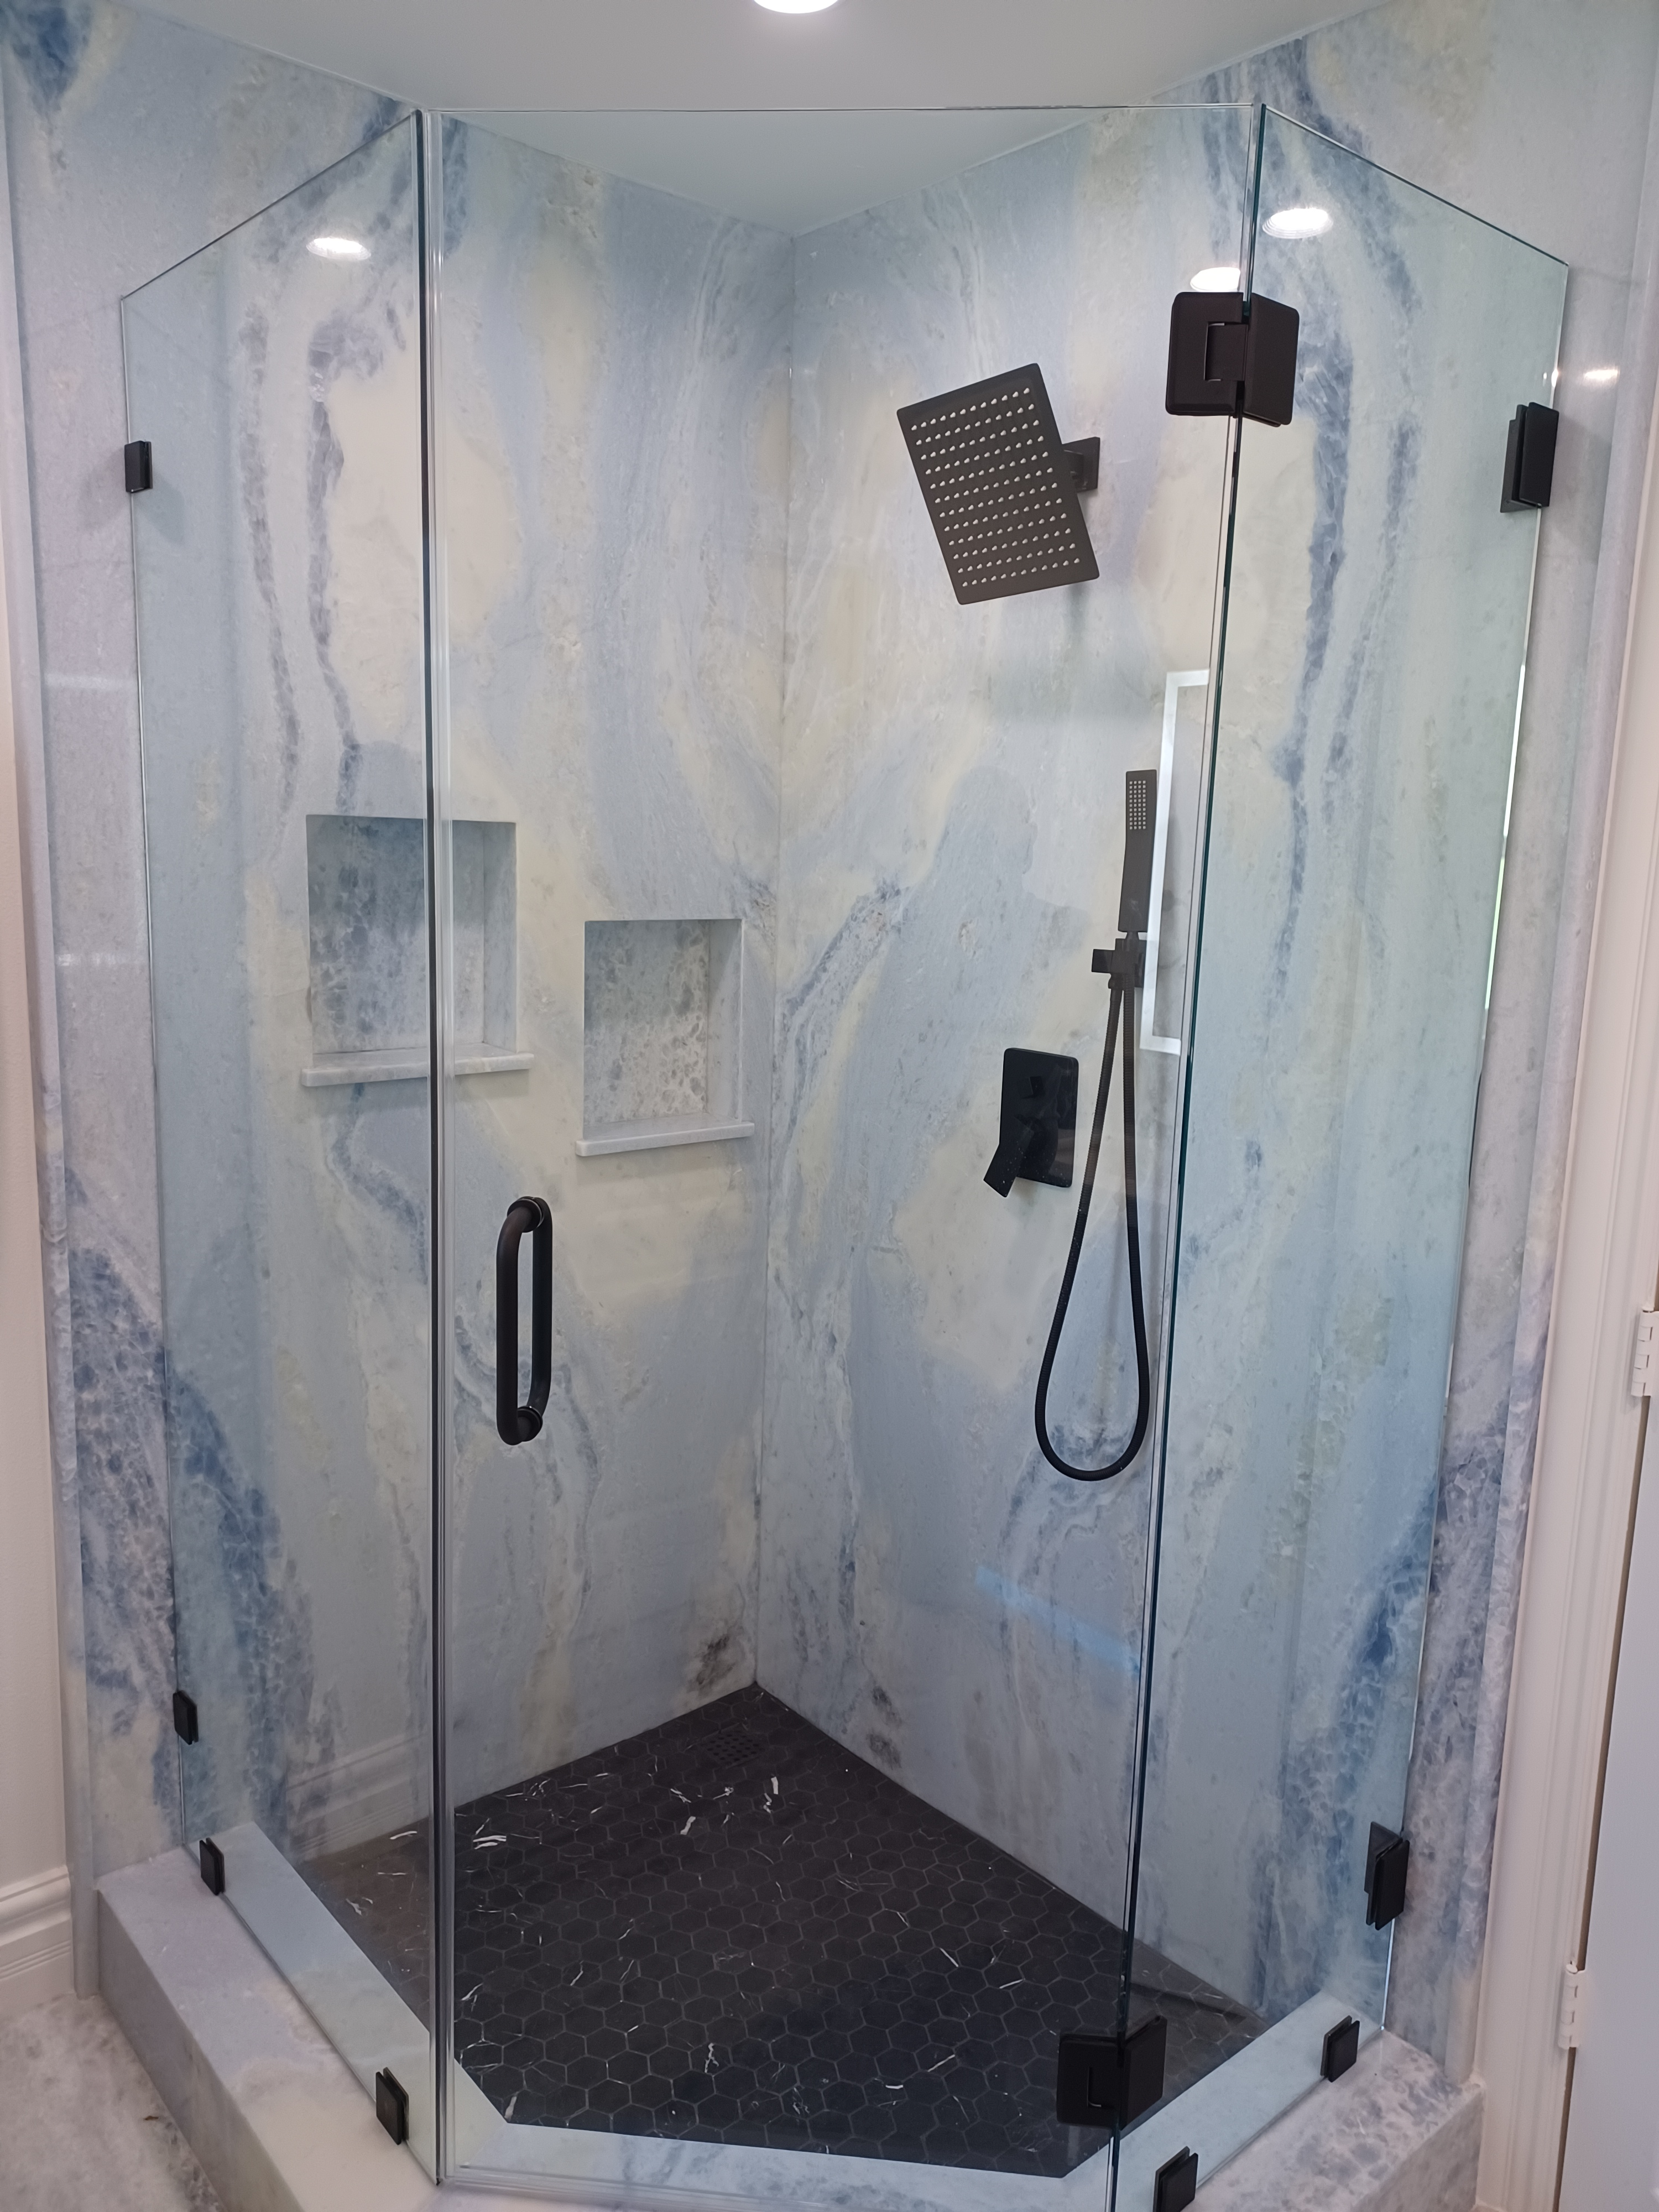 A shower with glass doors and black fixtures.